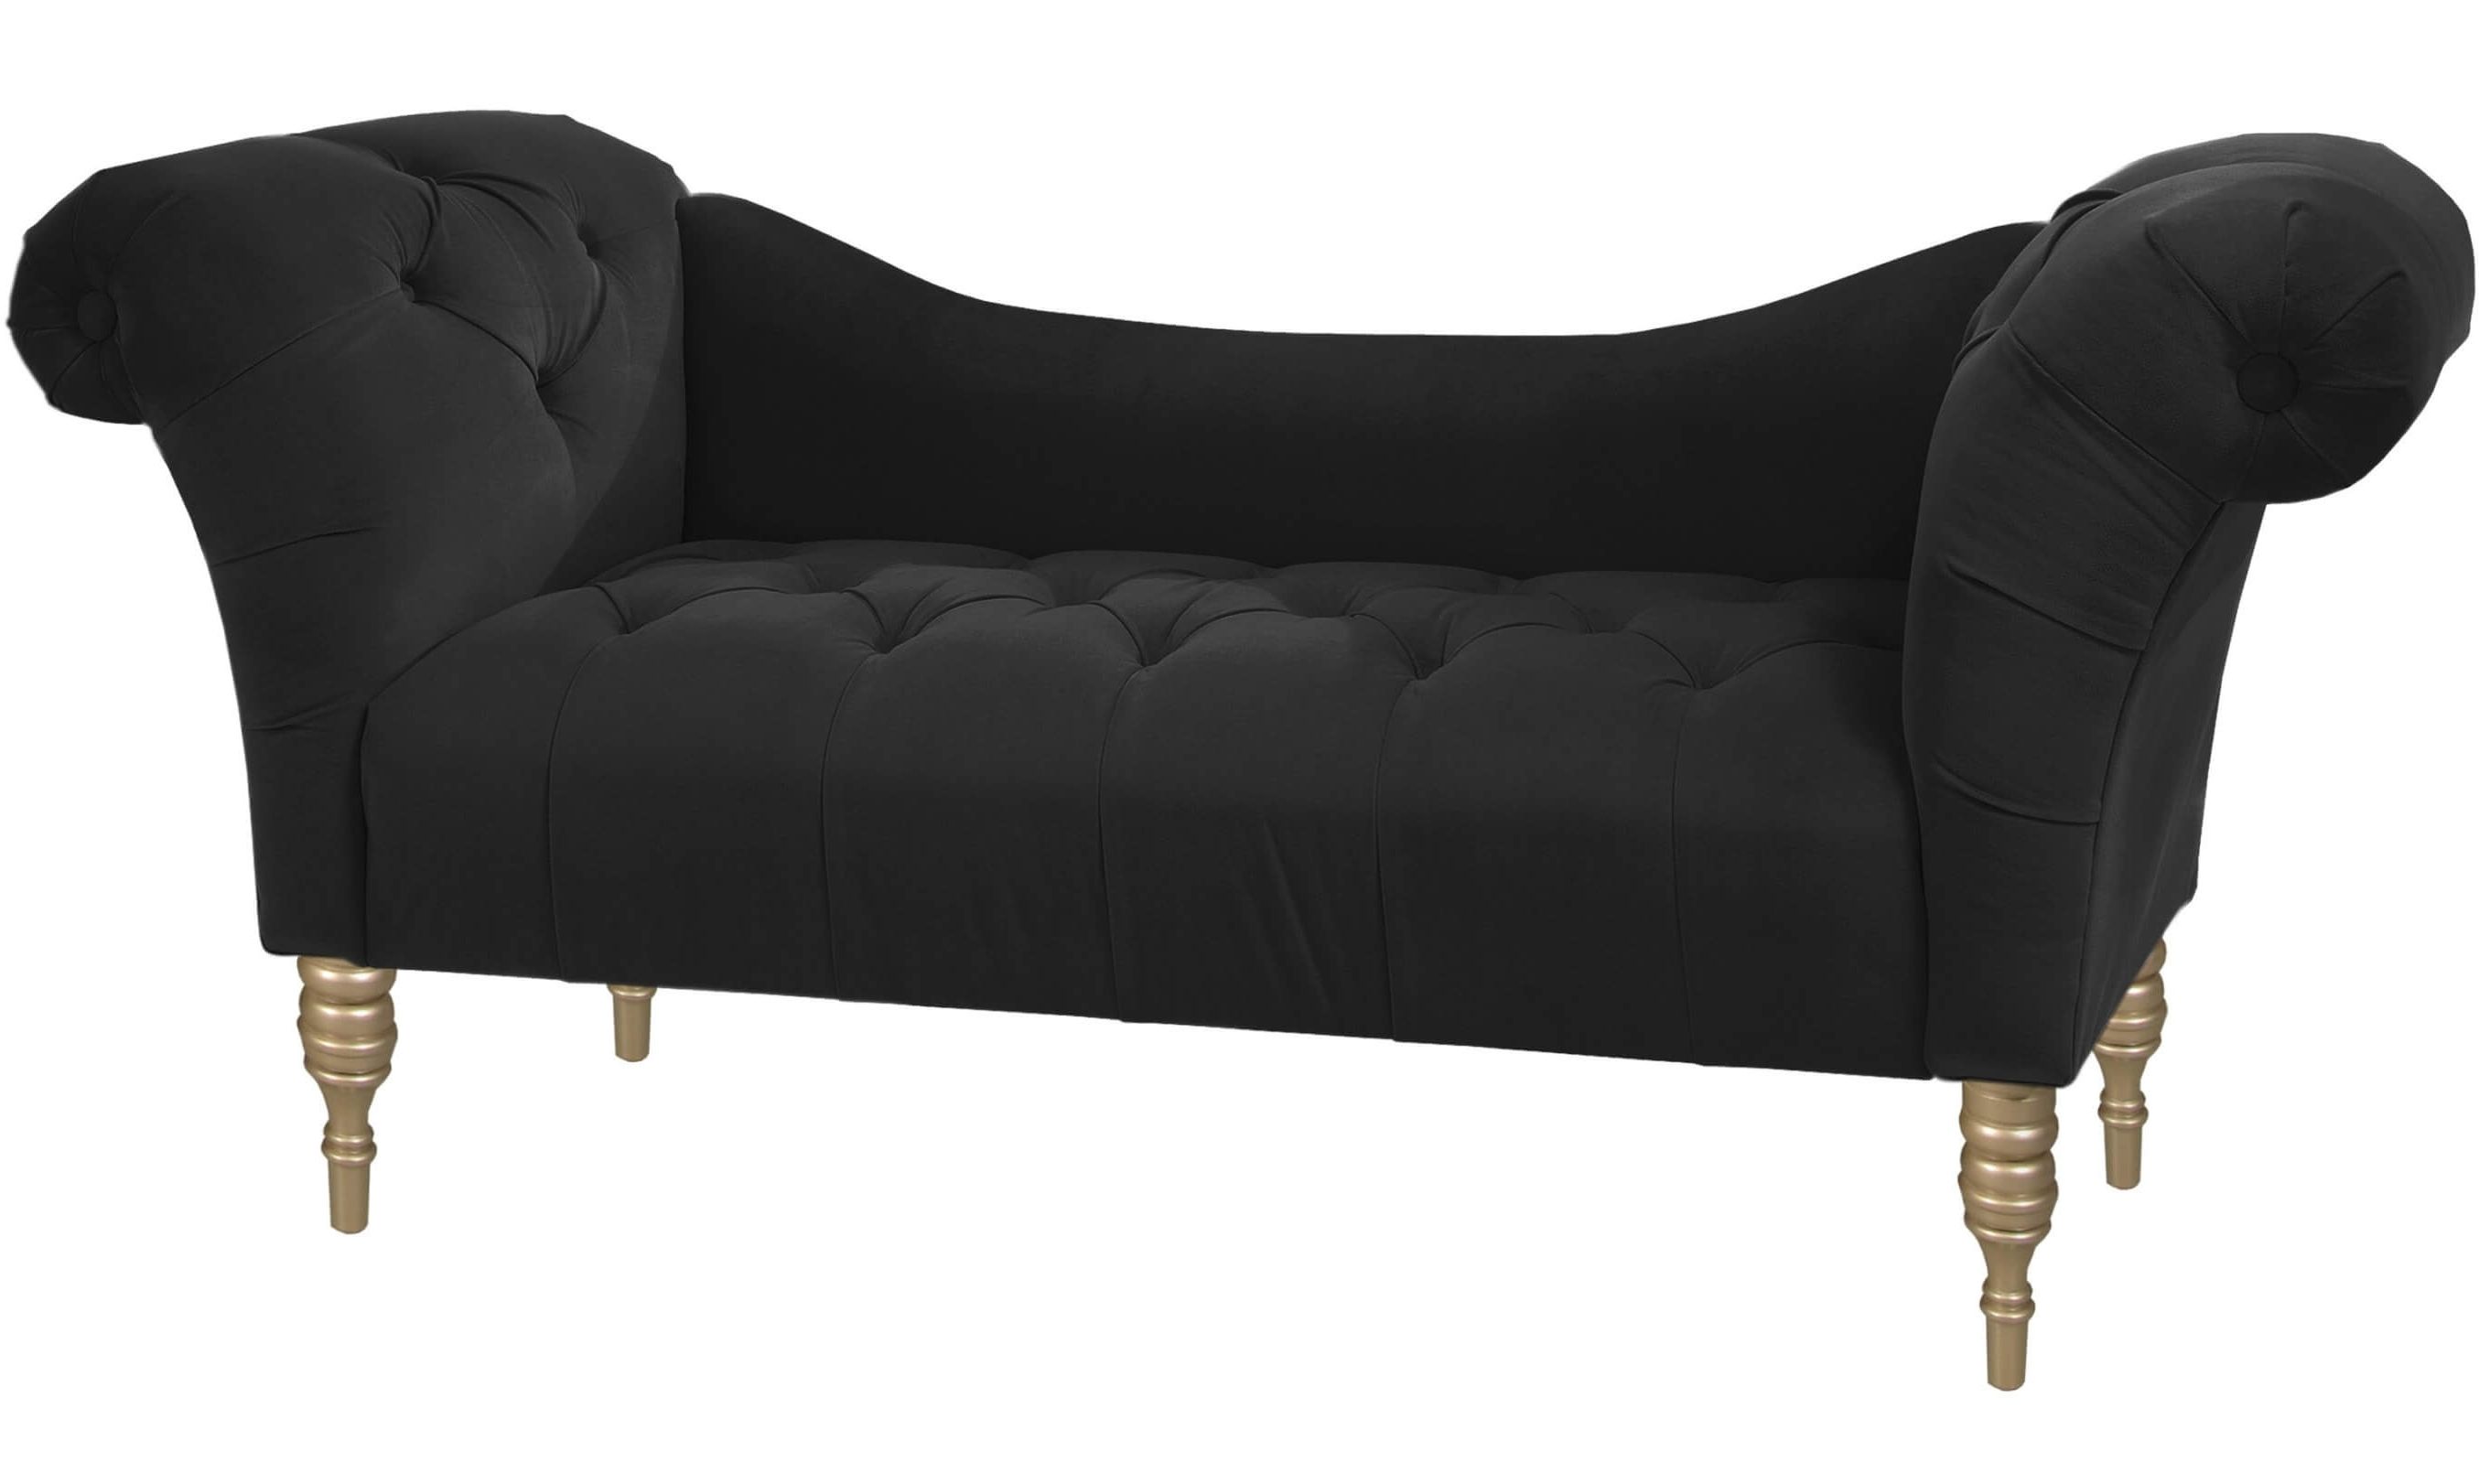 Black Chaise Lounges Pertaining To Trendy Top 20 Types Of Black Chaise Lounges (buying Guide) – (View 1 of 15)